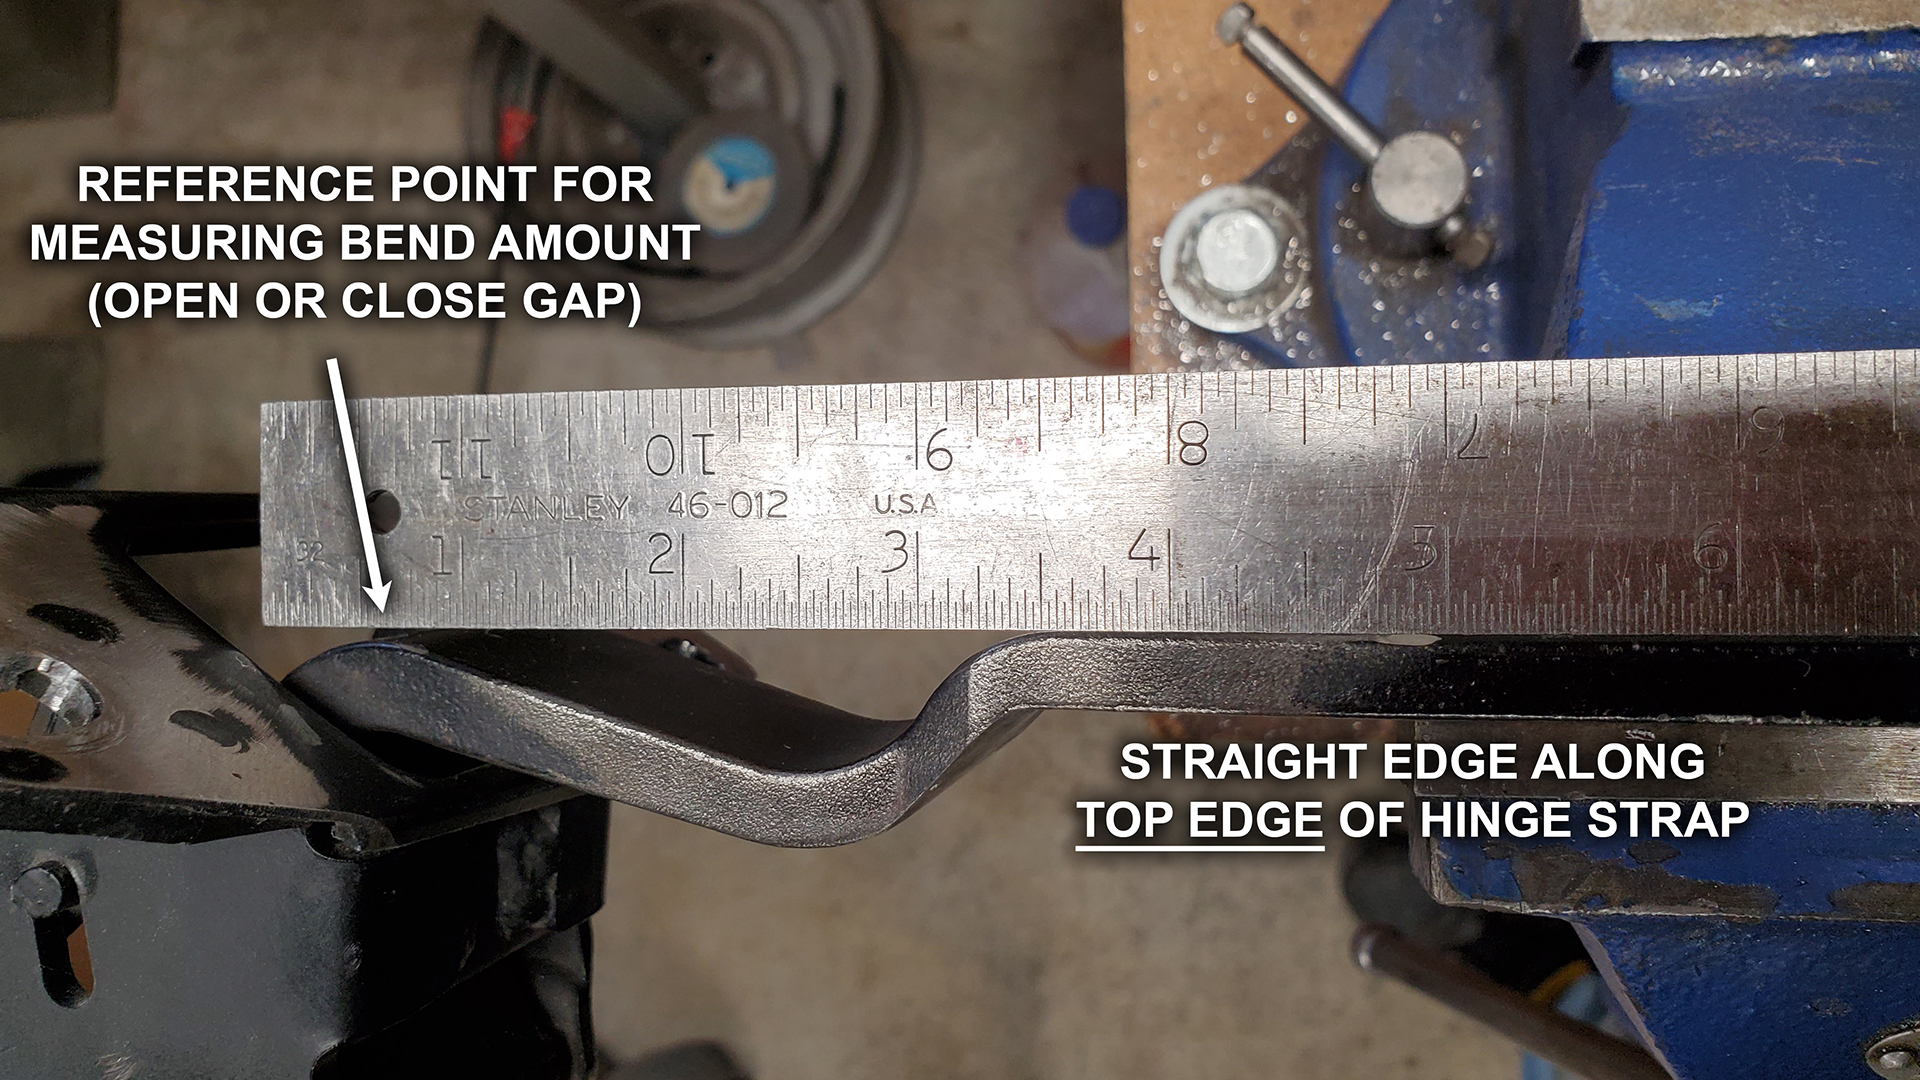 Use a straight edge along the upper edge of the strap as a reference to measure bend amount.